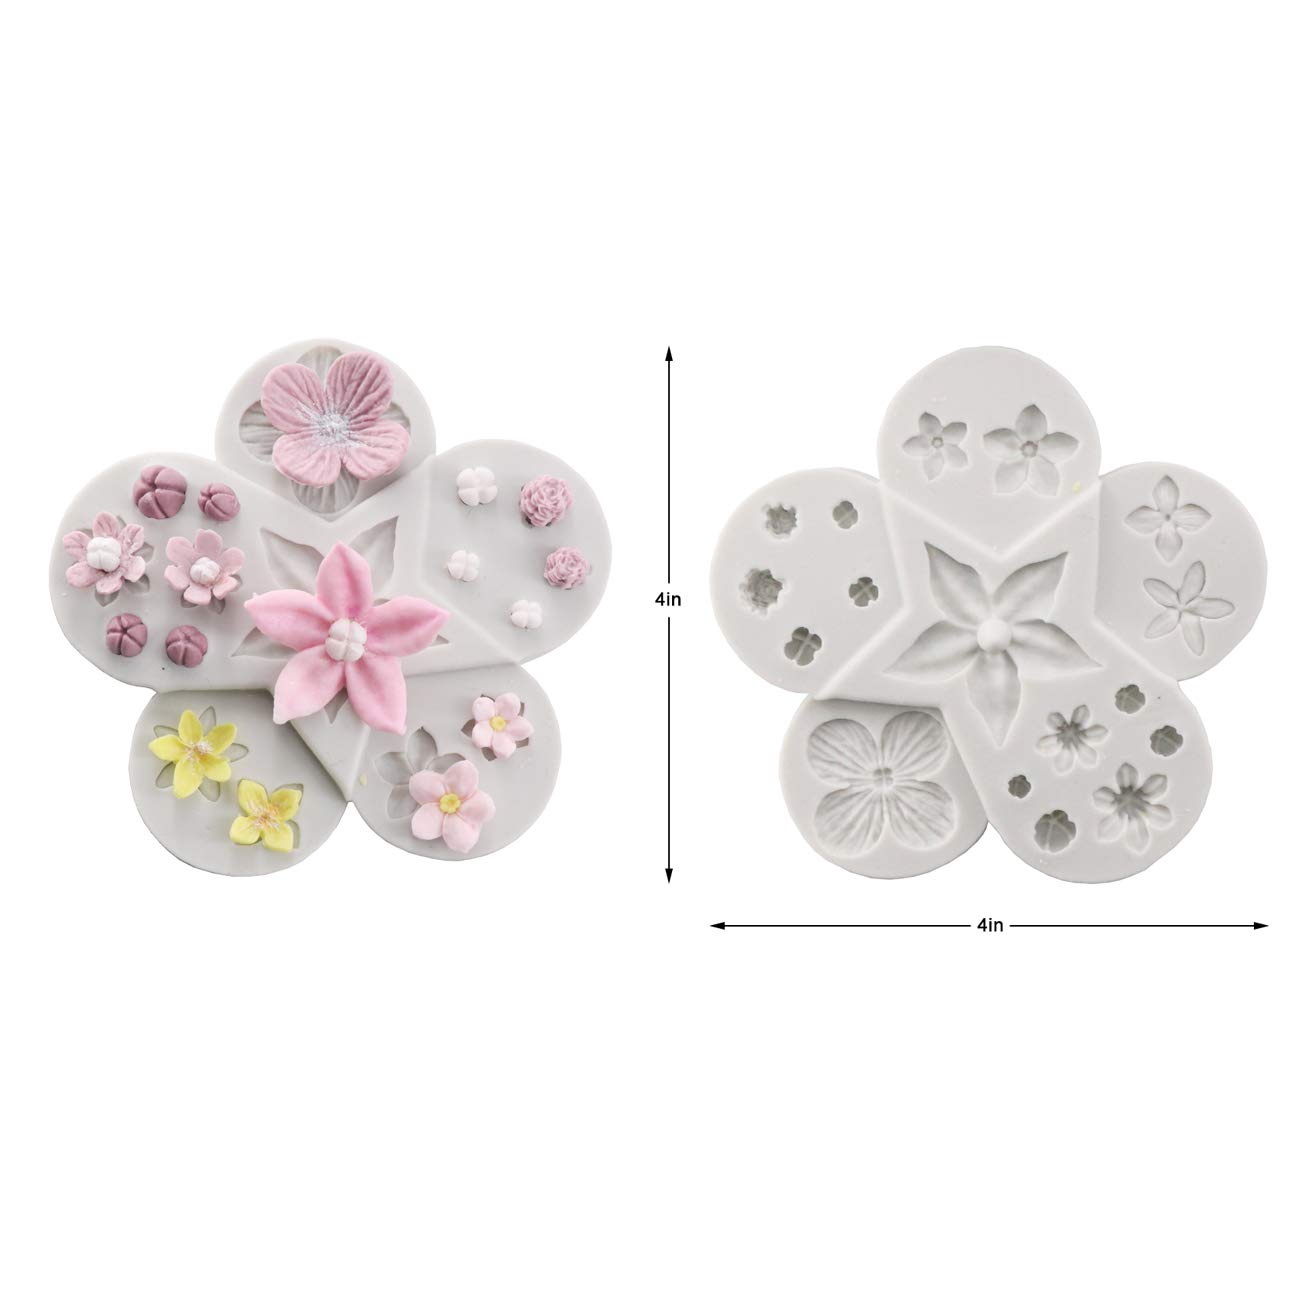 kowanii Fondant Molds Silicone, Rose Flower Gumpaste Mold, Mini Sugarcraft Flower Cookie Molds, Fondant Tools and Accessories Cupcake Decorating Supplies, 2 Pack